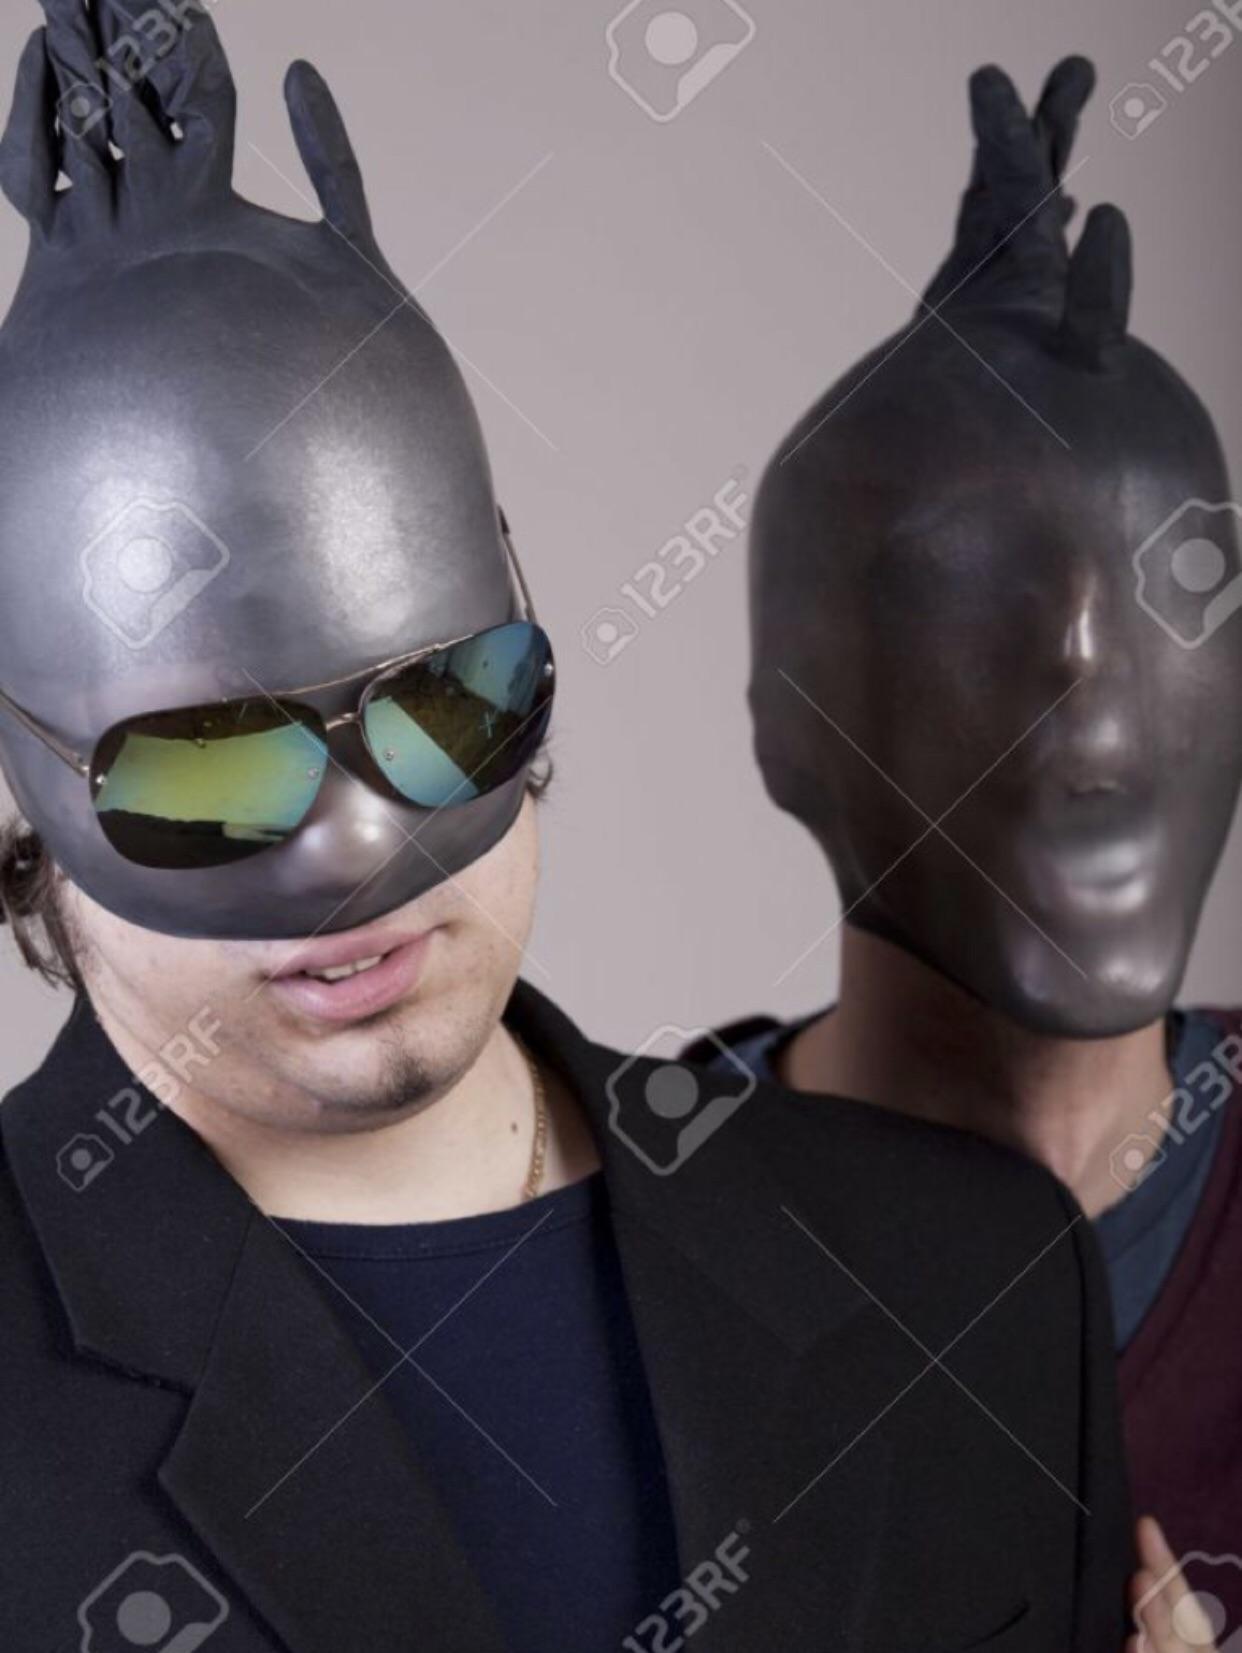 A crazy WTF stock photo of two guys with black rubber gloves on their heads with one of them wearing sunglasses as well. 